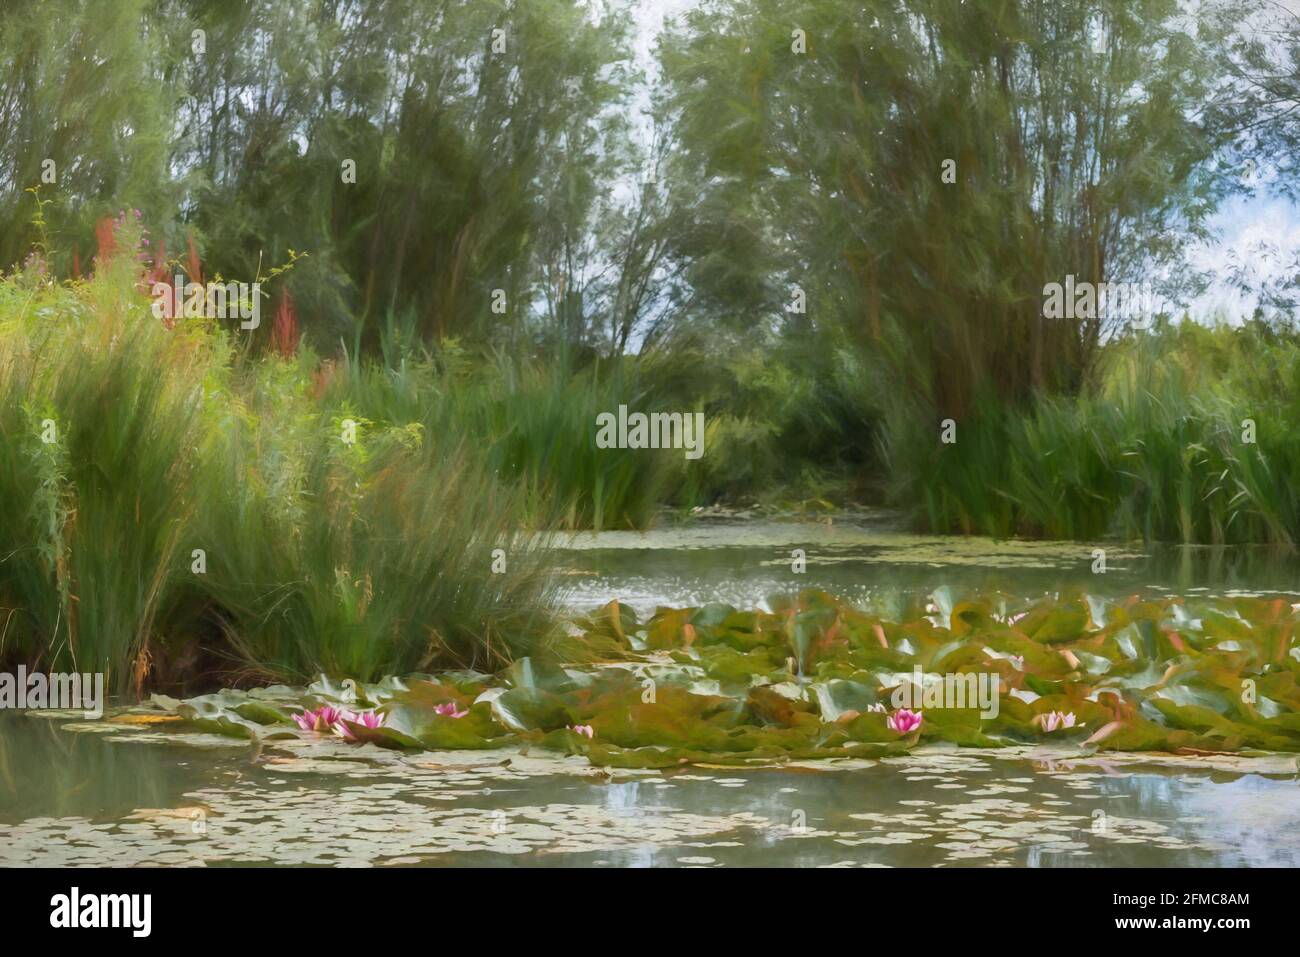 Digital painting of a pink and white waterlily amongst green lily pads on a pond. Stock Photo